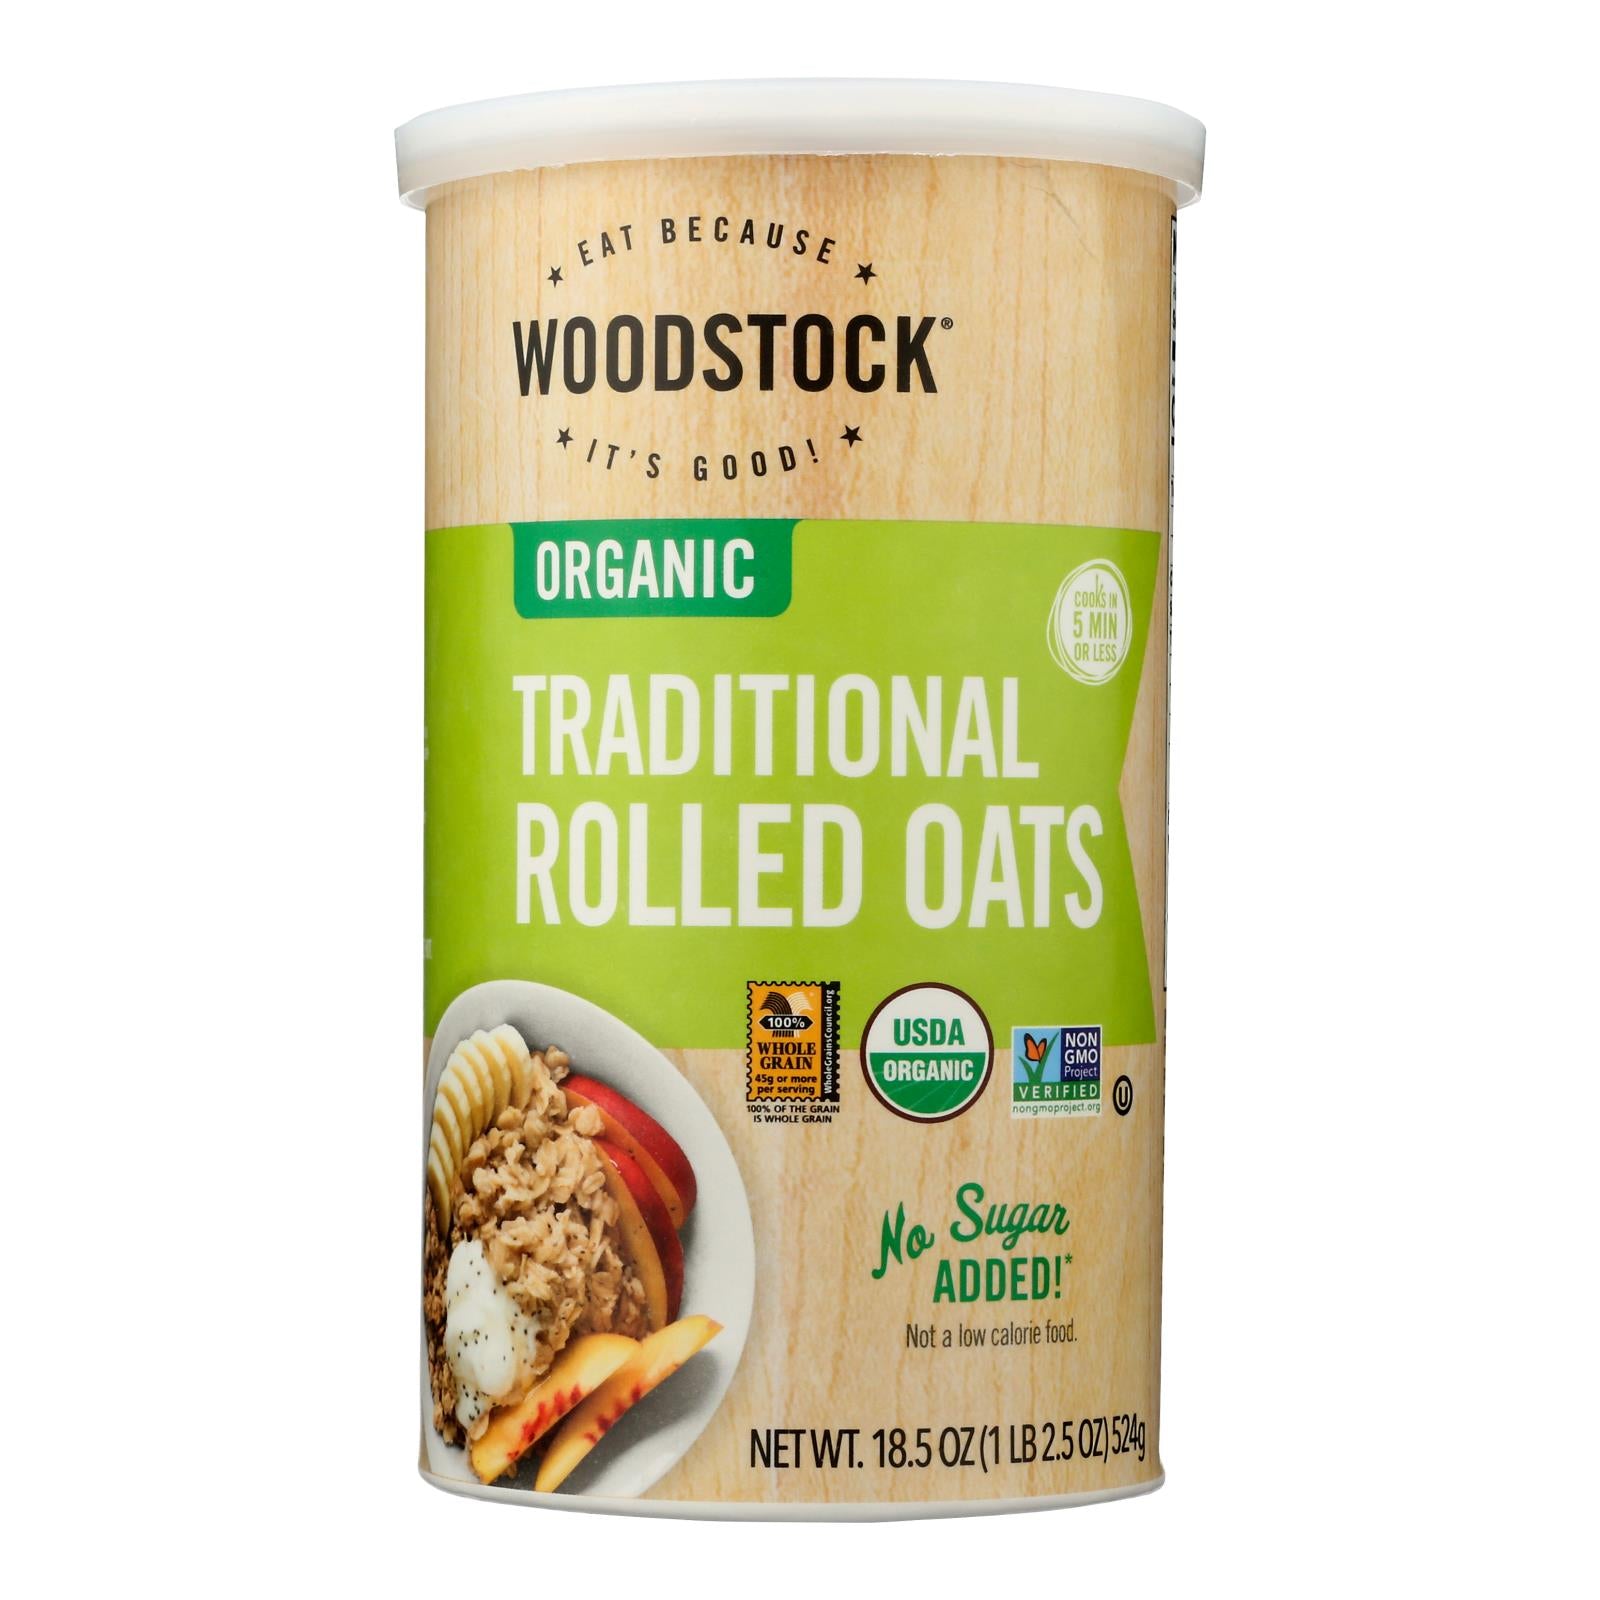 Woodstock Organic Traditional Rolled Oats - Case Of 12 - 18.5 Oz